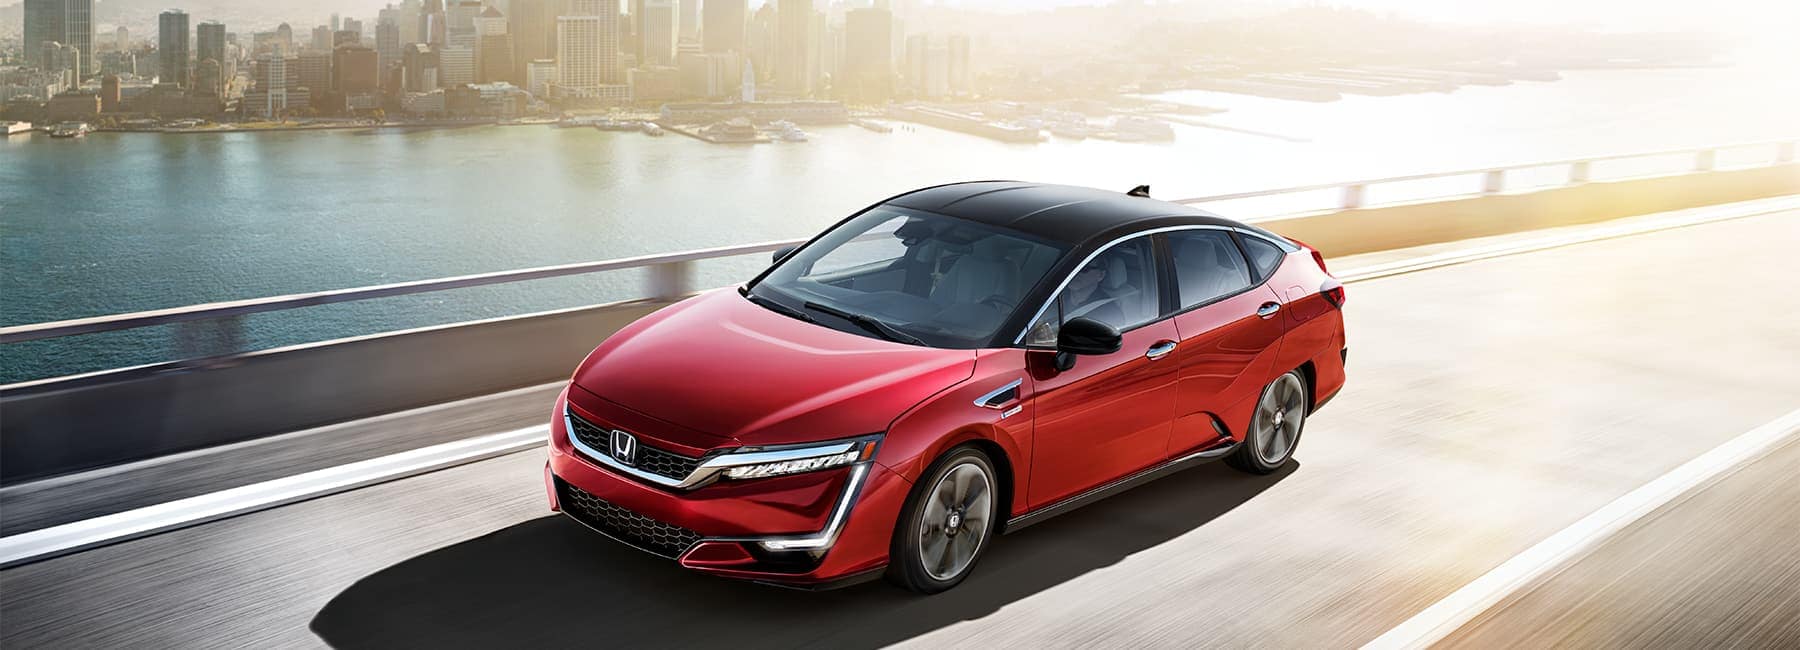 2020 Honda Clarity front View